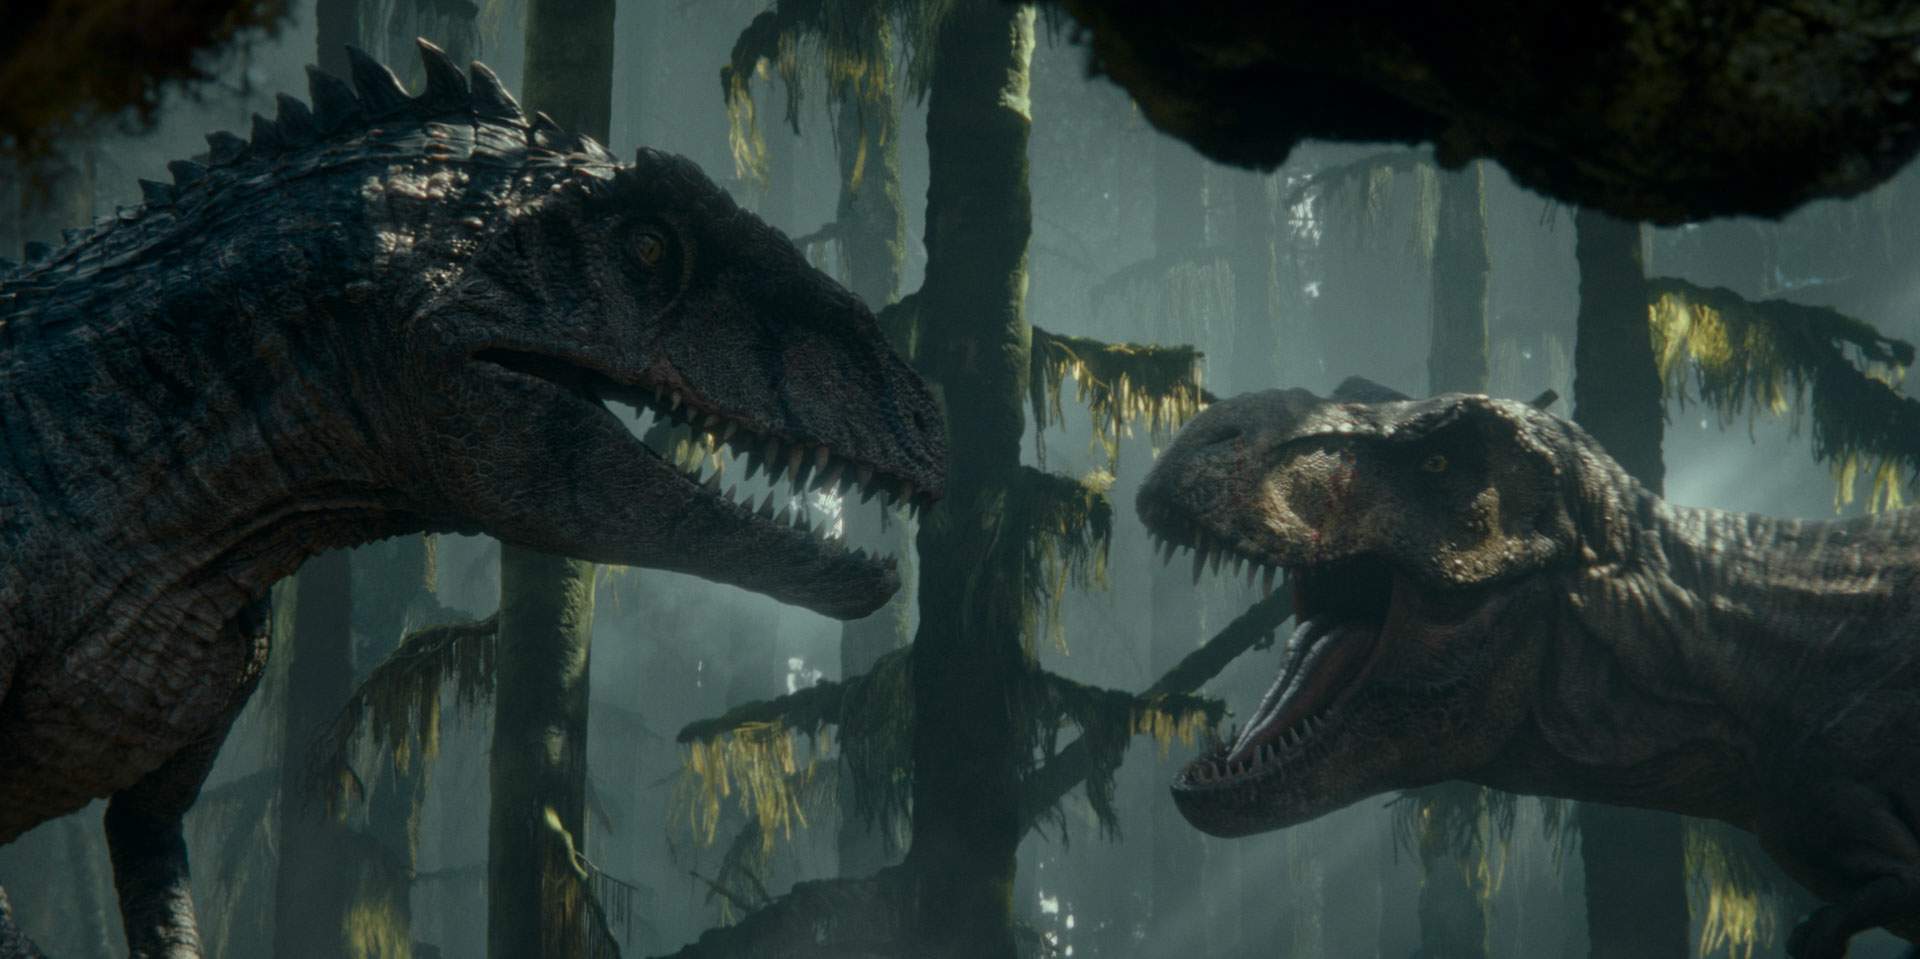 Jurassic World Dominion has some great action-packed scenes, set in breathtaking locales